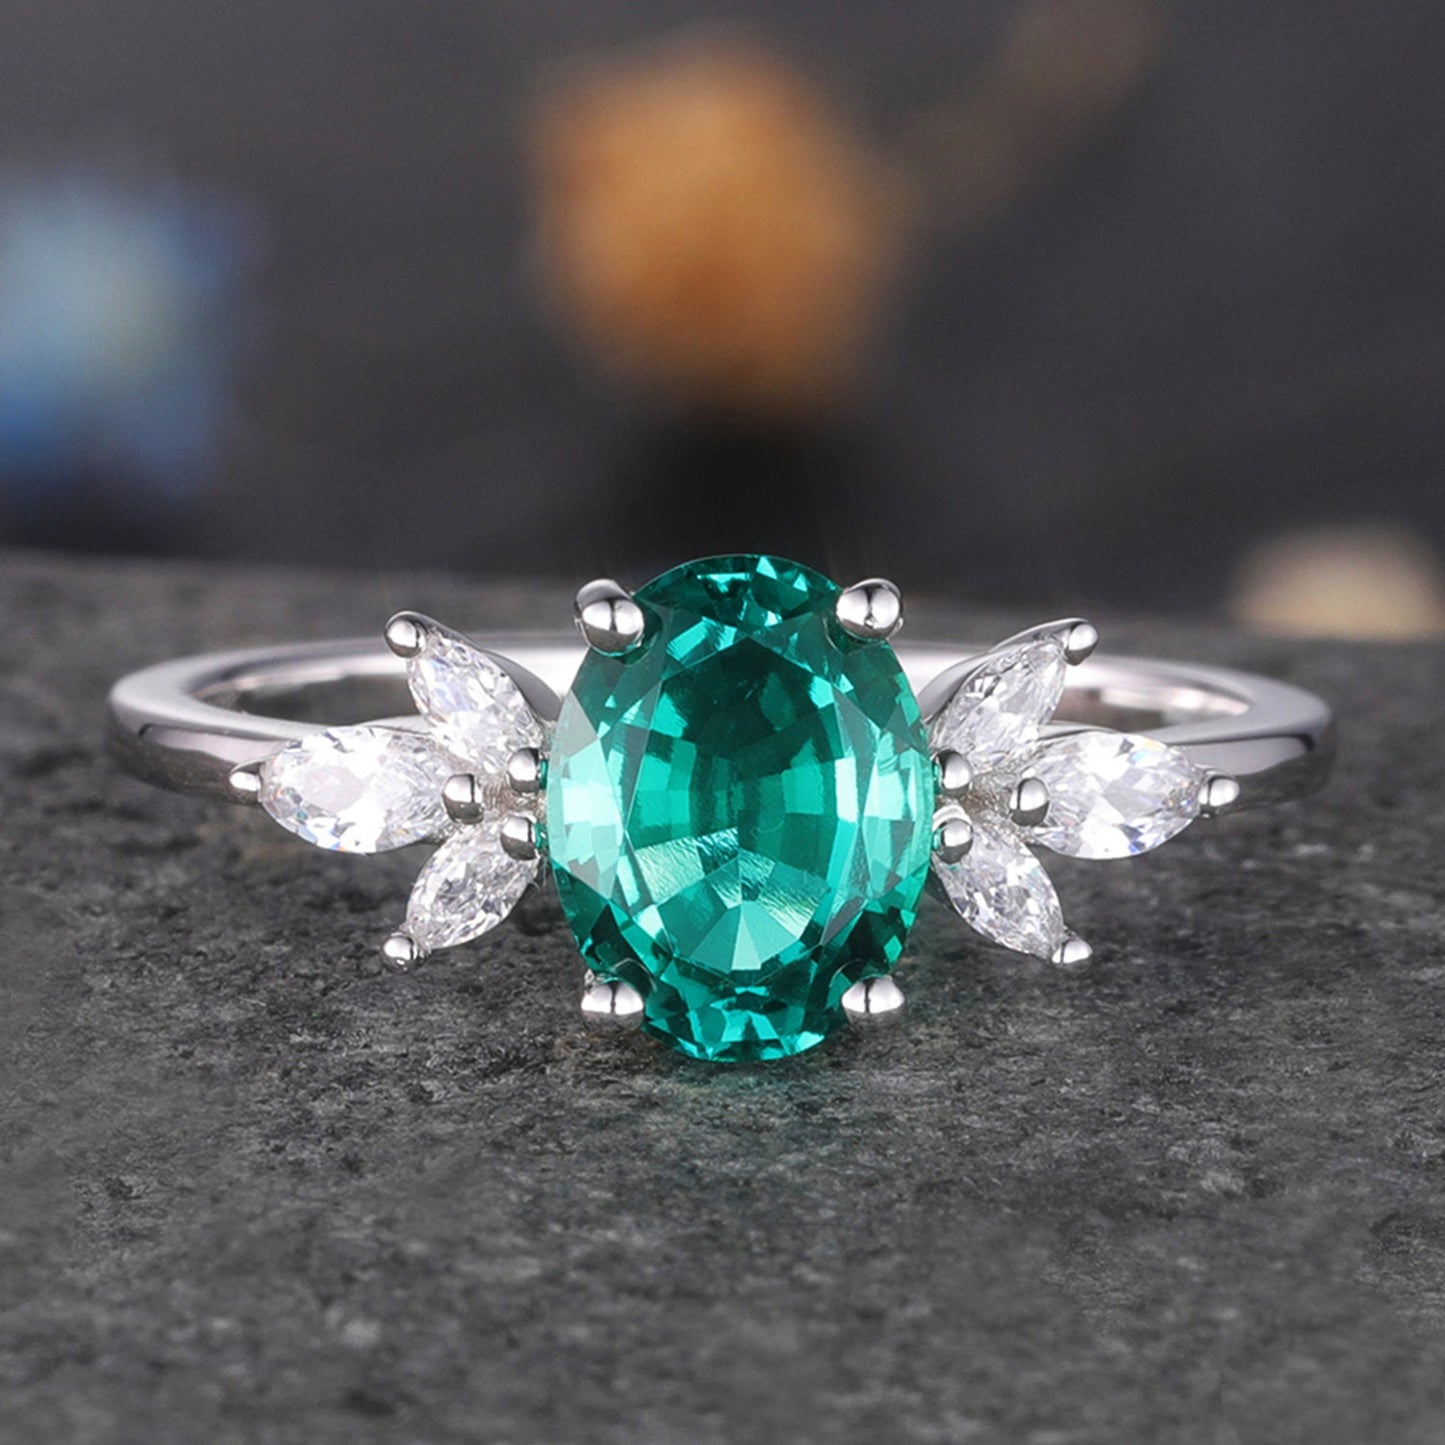 Oval Shaped emerald engagement ring women white gold moissanite wedding ring vintage floral jewelry 6x8mm May birthstone gift for her